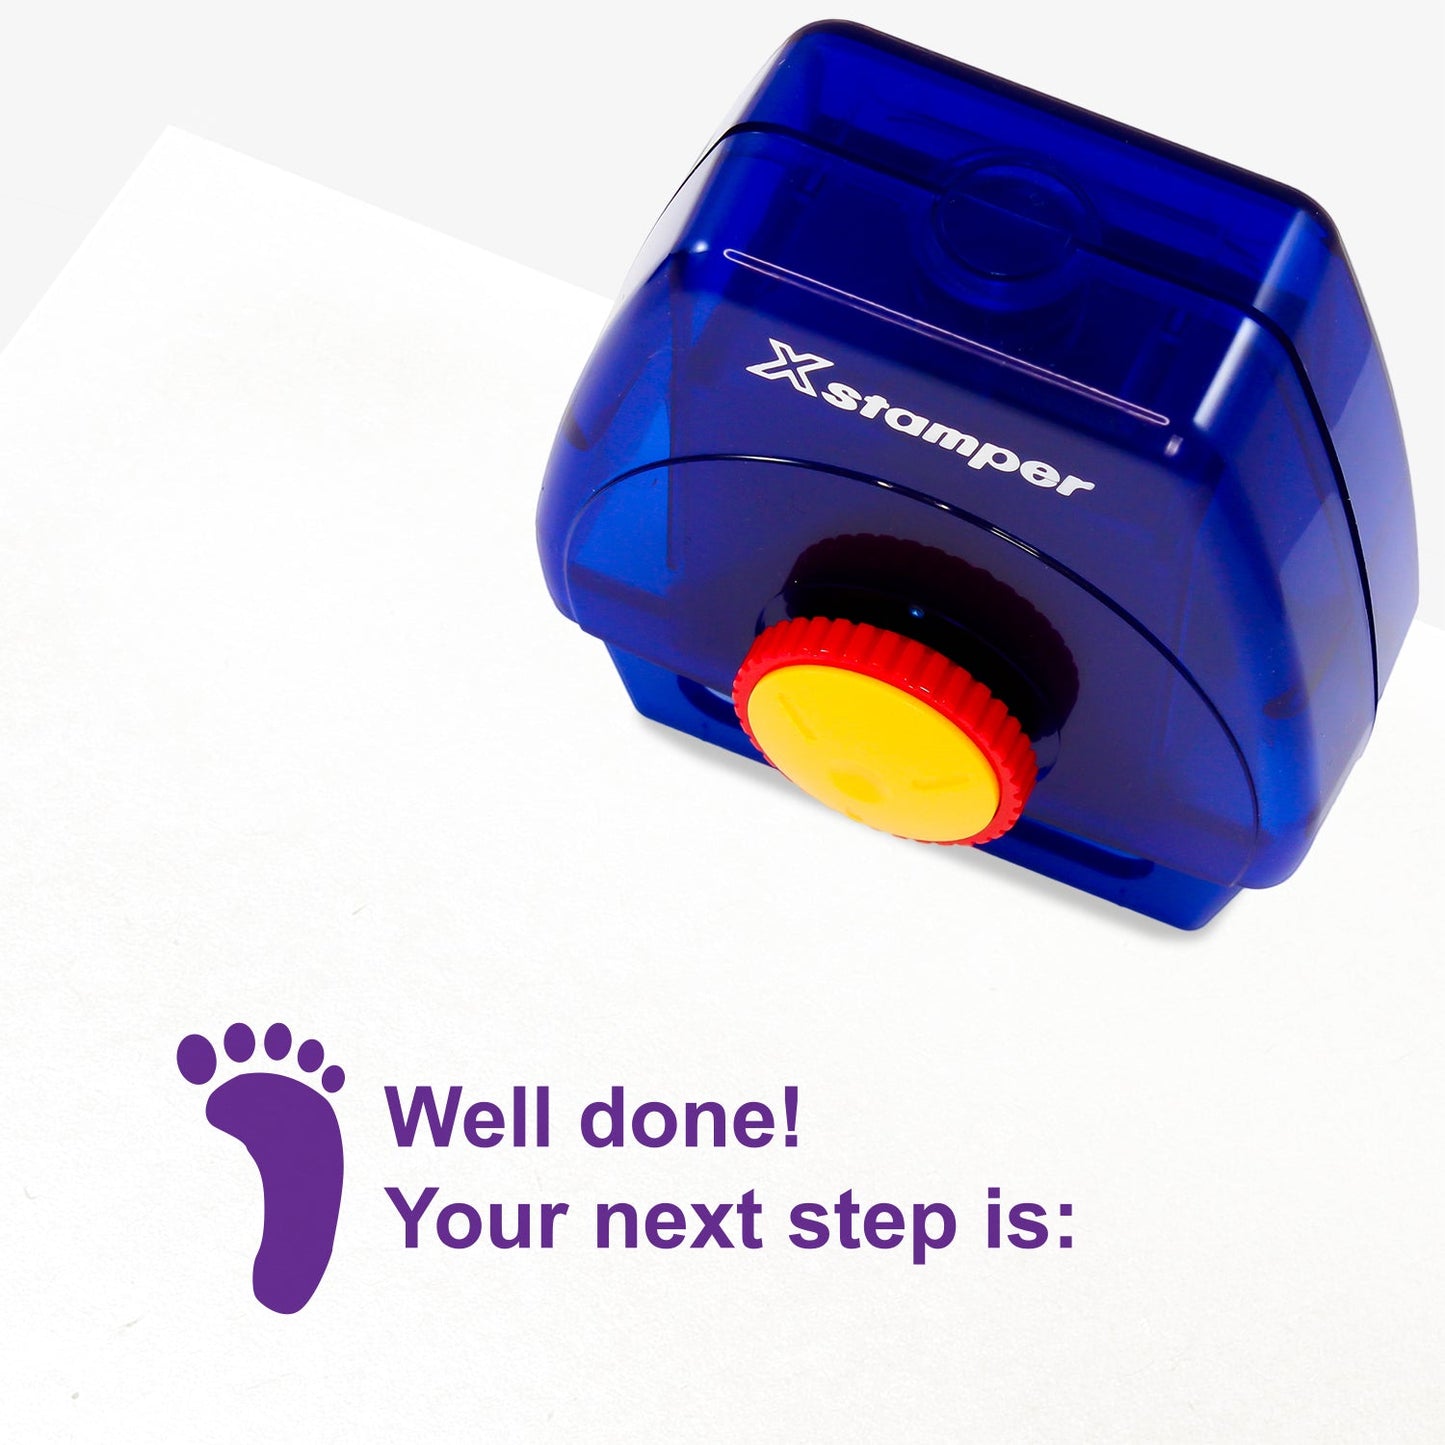 Well Done! Your Next Step Is: Twist N Stamp Brick - Purple